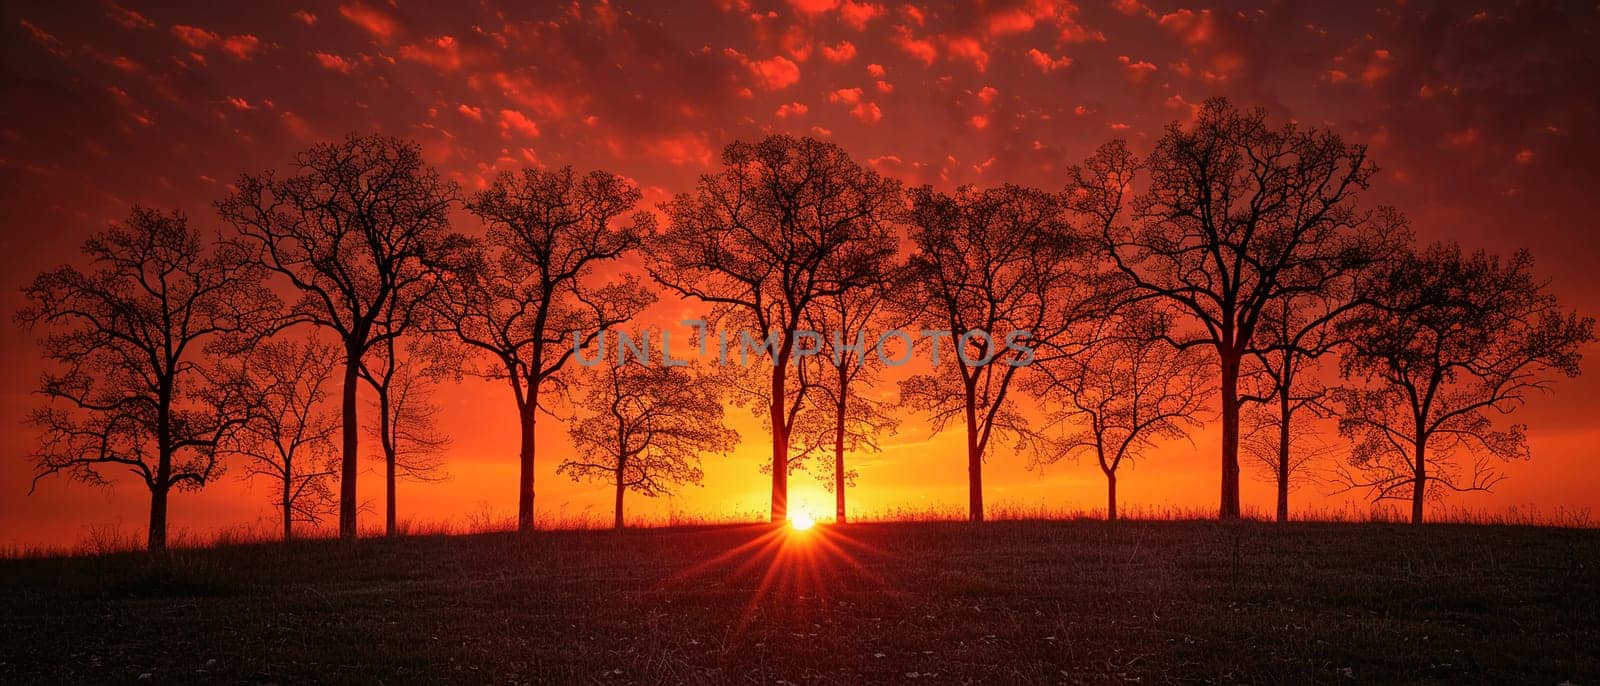 The fiery glow of a sunset behind a silhouette of trees, capturing the end of a day.